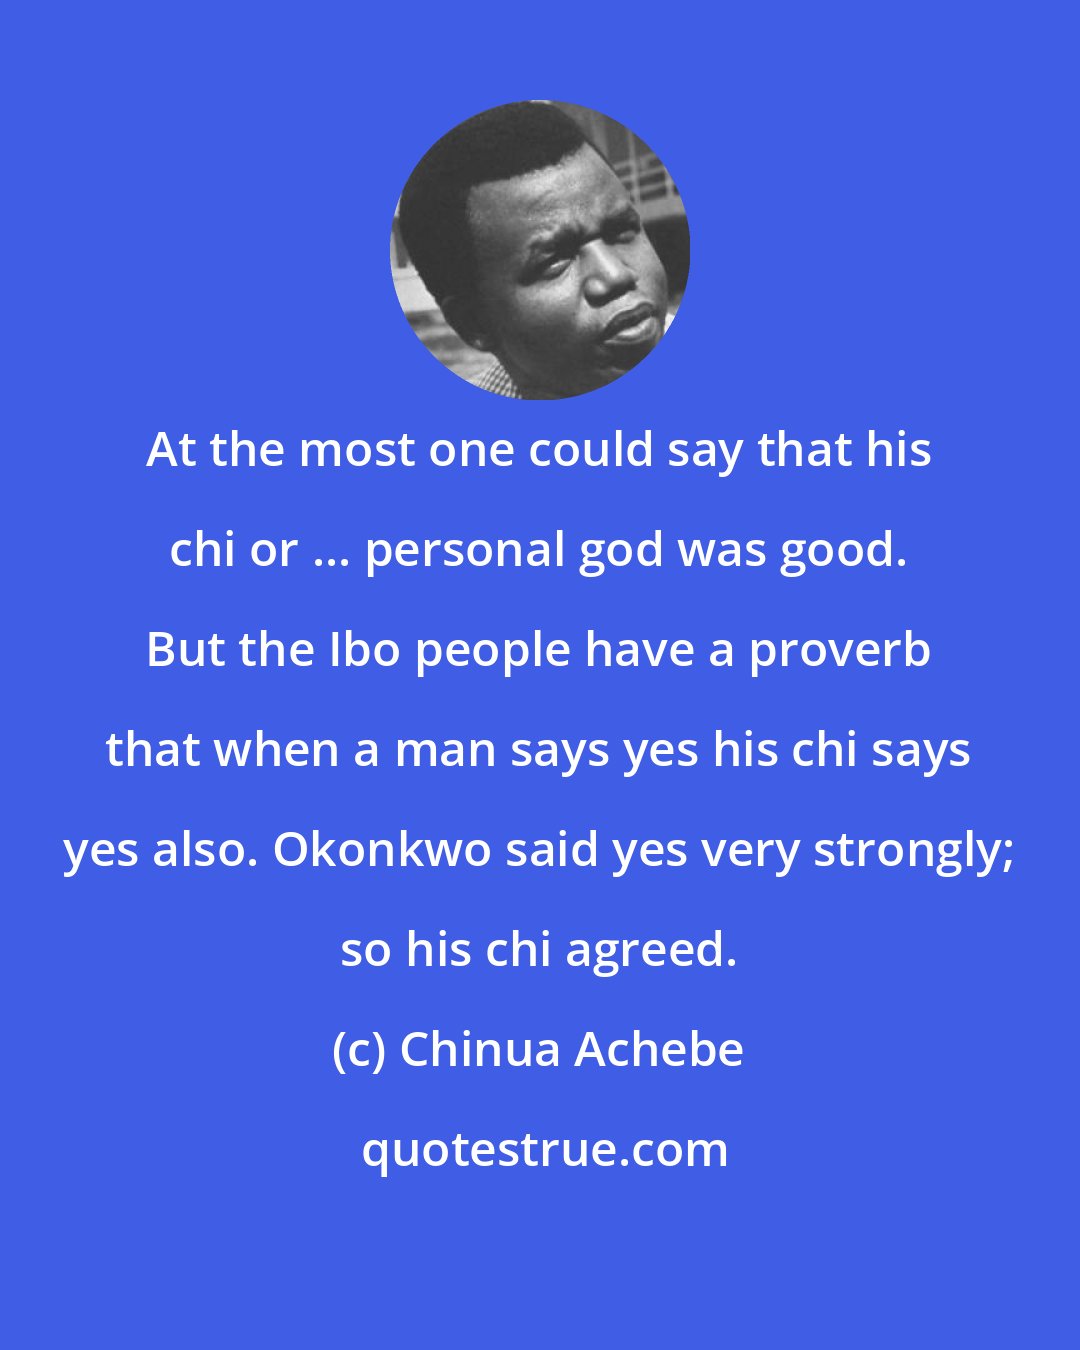 Chinua Achebe: At the most one could say that his chi or ... personal god was good. But the Ibo people have a proverb that when a man says yes his chi says yes also. Okonkwo said yes very strongly; so his chi agreed.